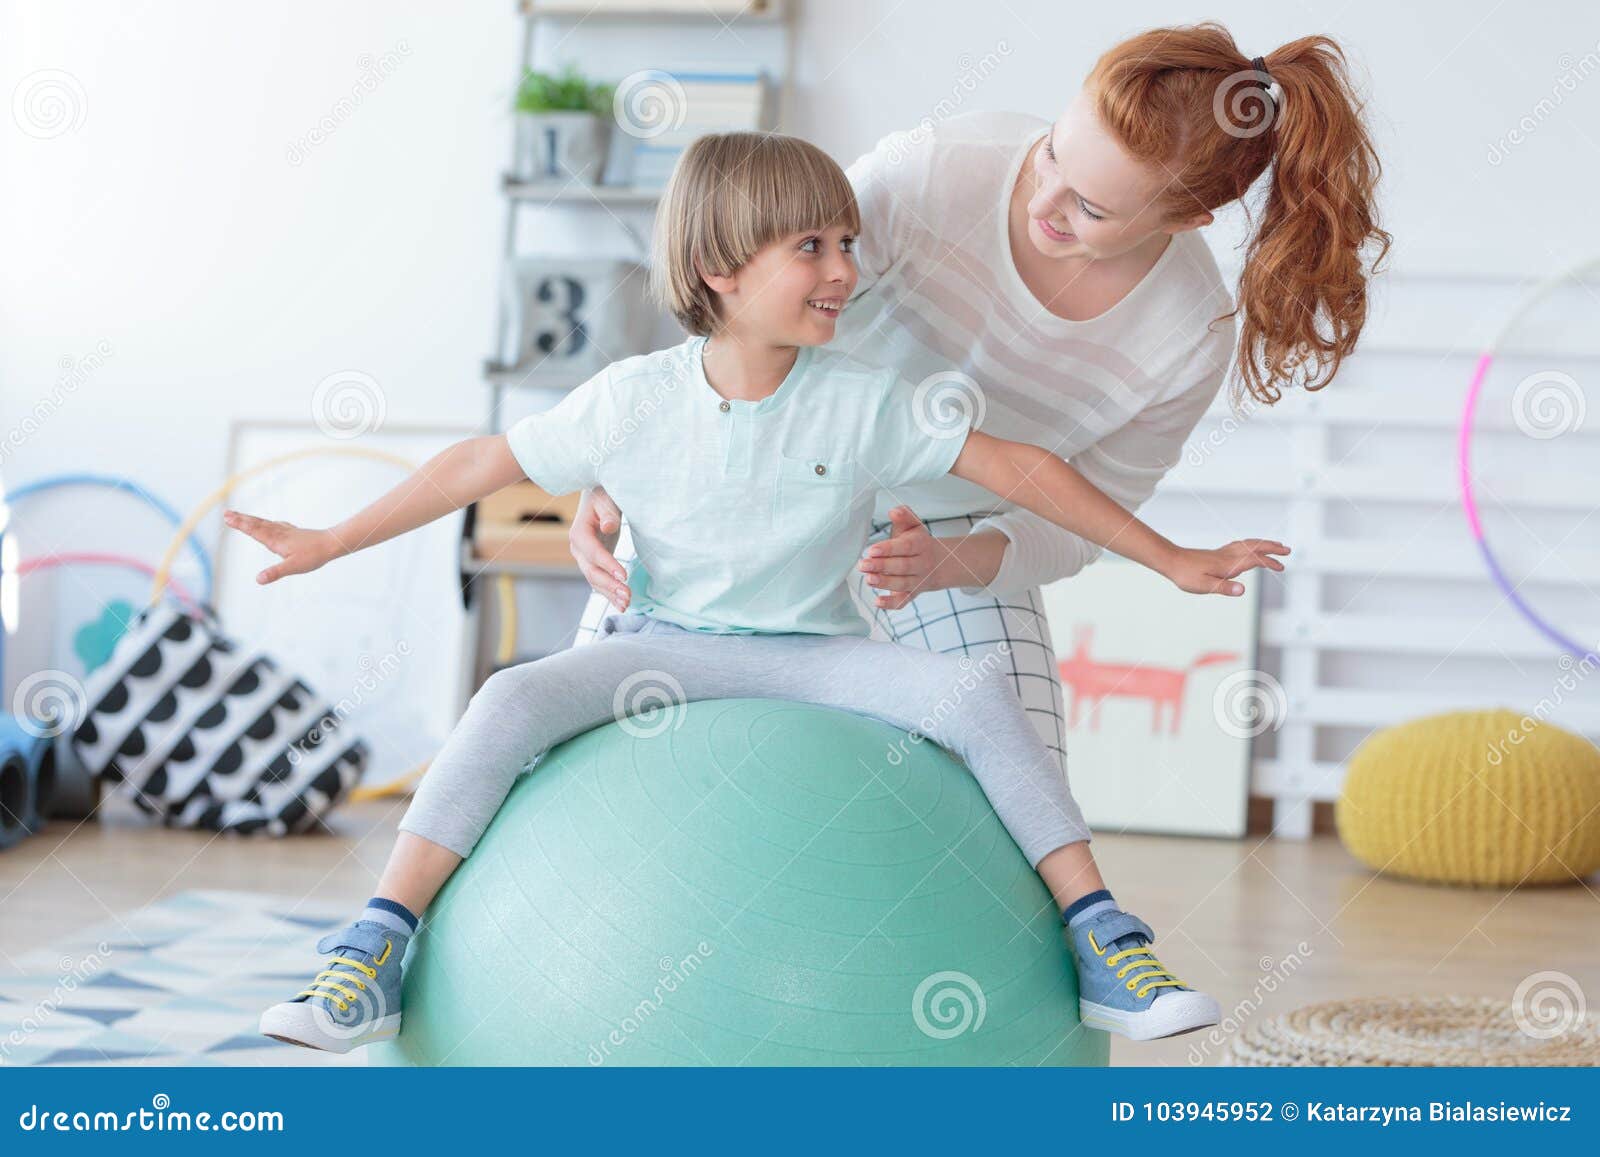 physical therapist assisting little boy